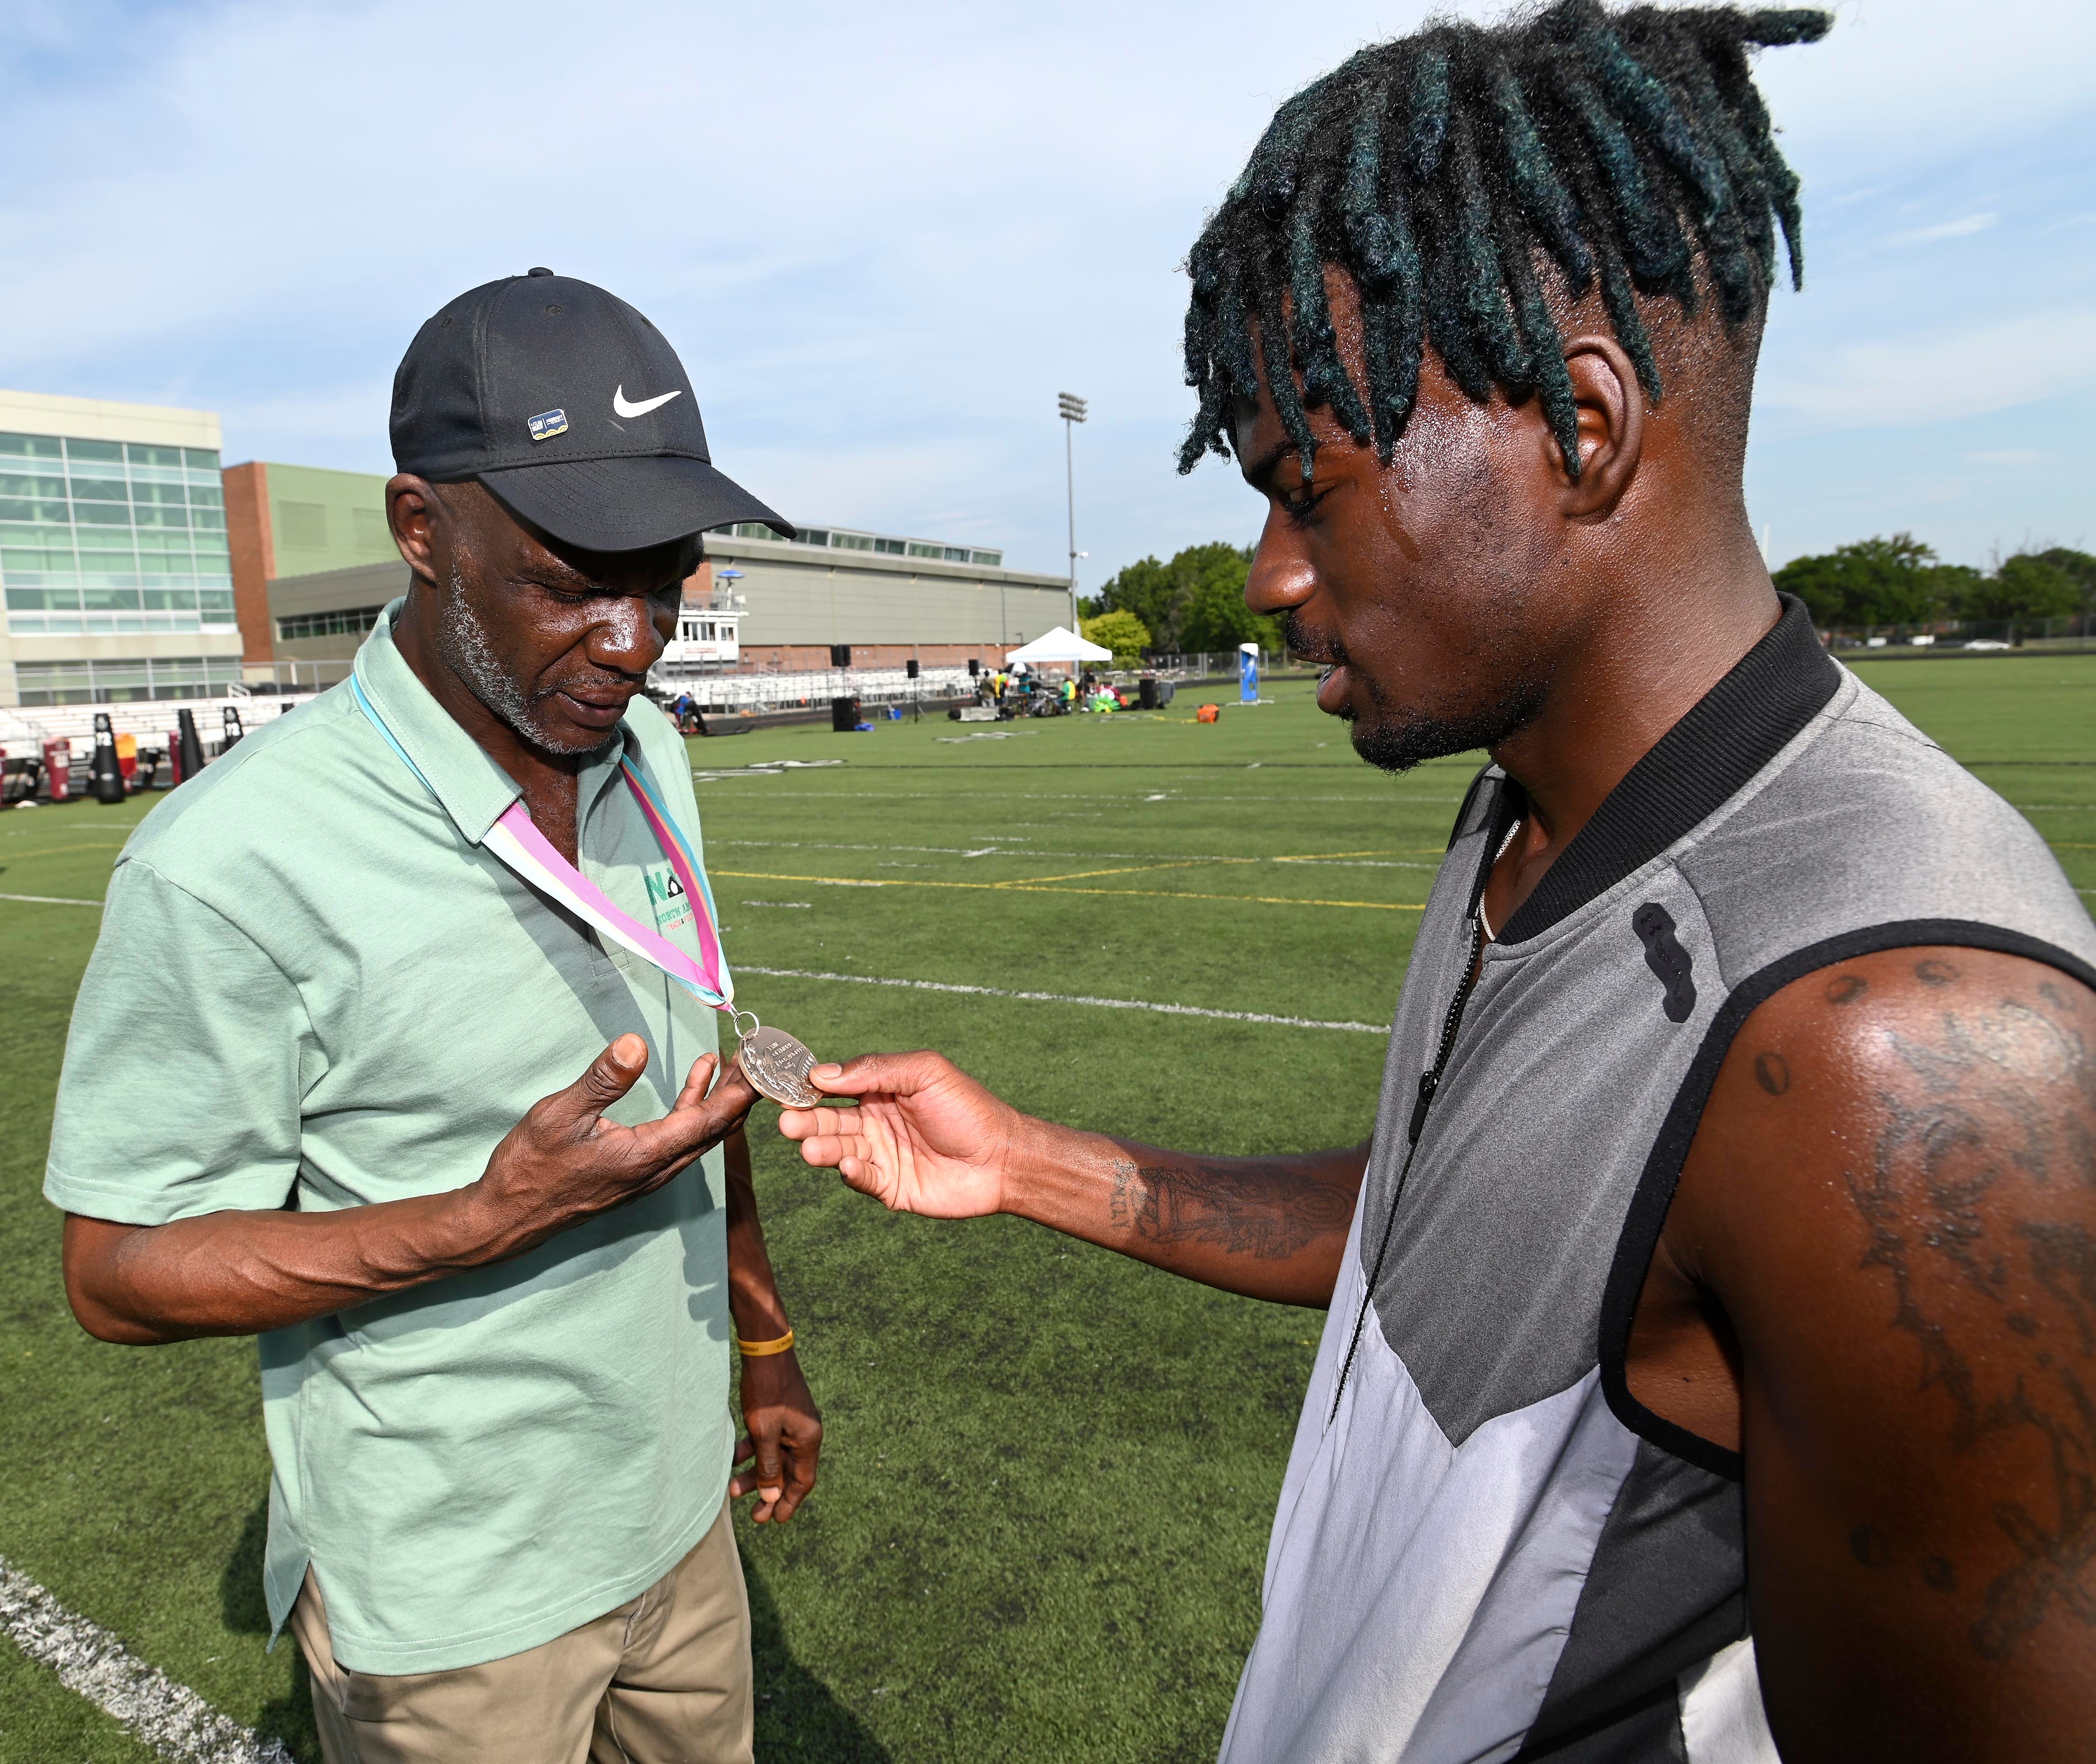 Earl Jones, left, shows his Olympic medal to Montel Lewis, 21, of Detroit, Saturday morning, Aug. 20, 2022. Jones won a bronze medal in the 800-meter run in the 1984 Olympics.